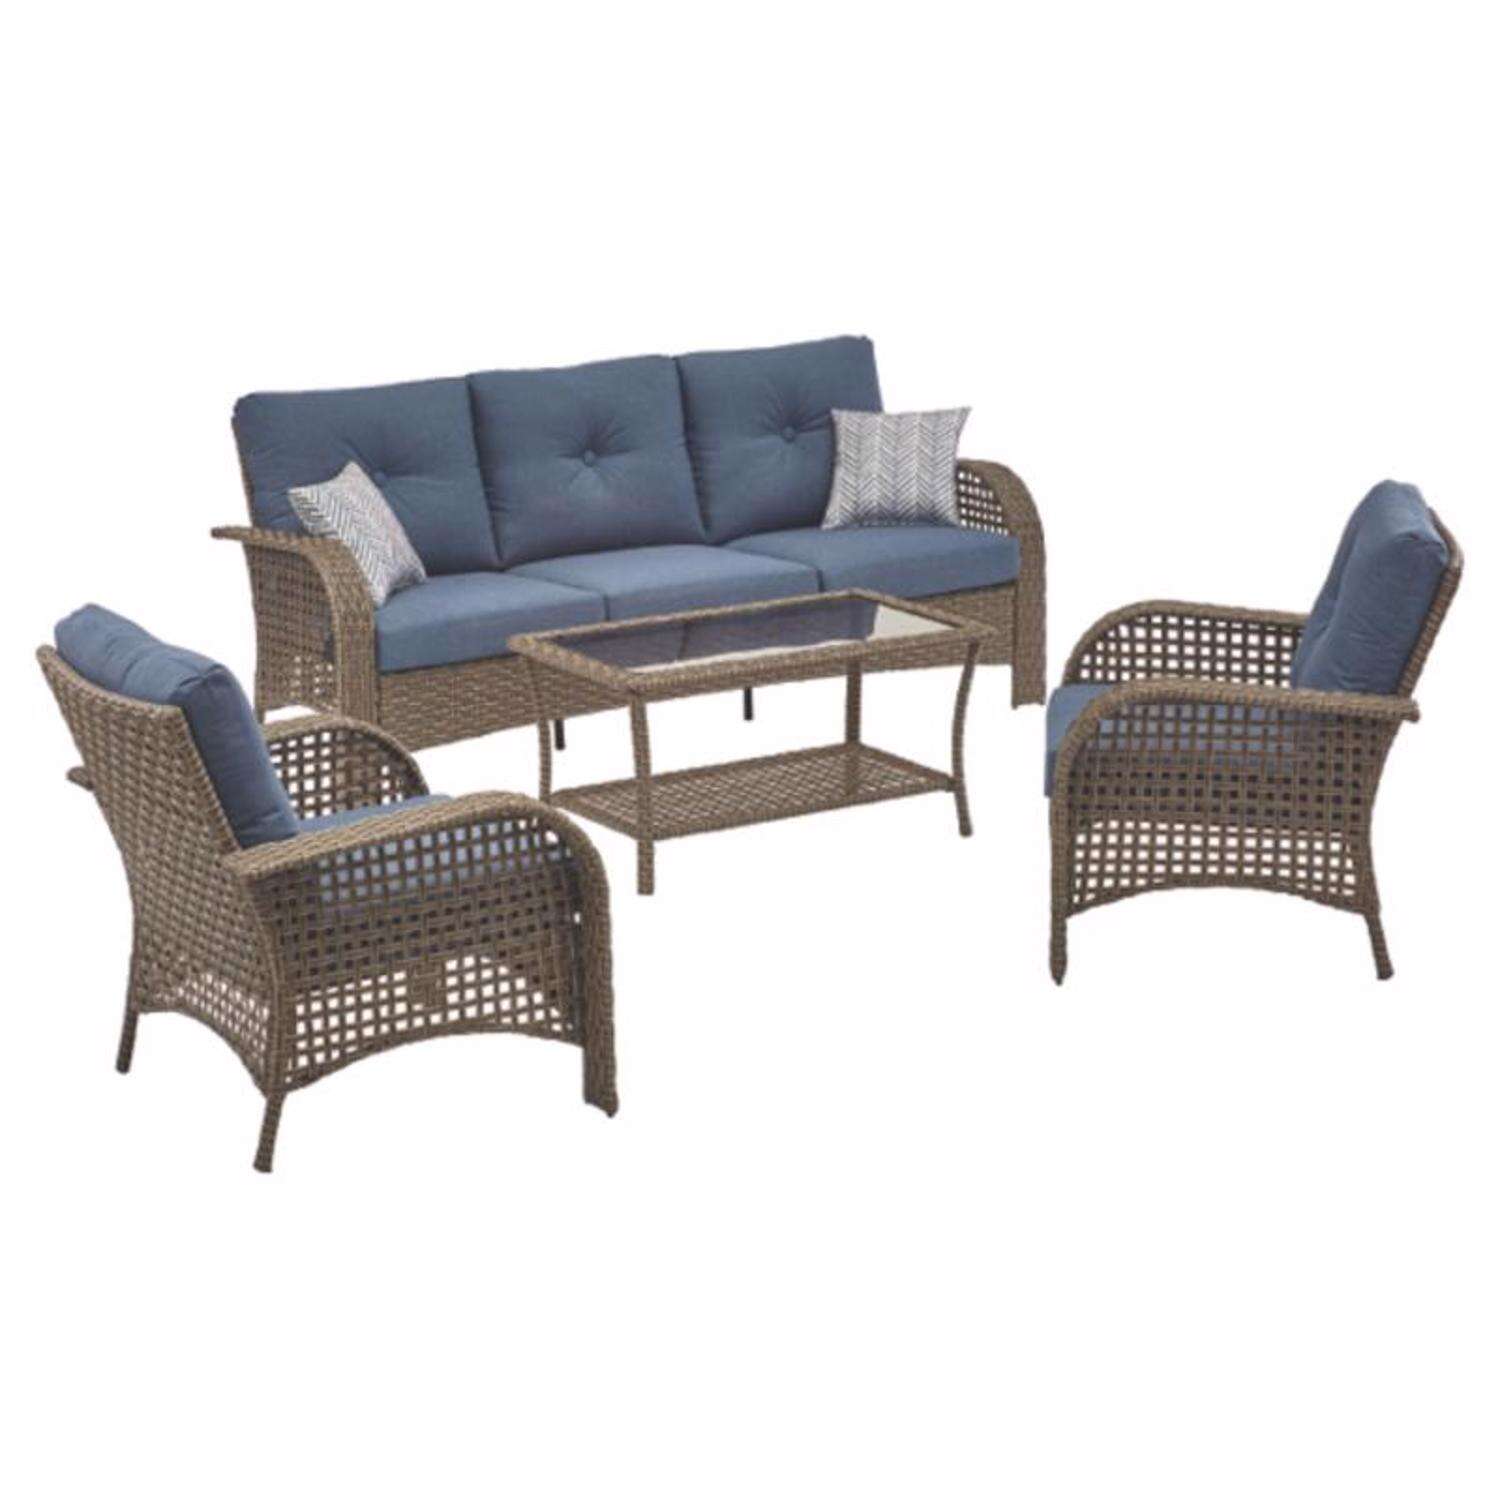 Living Accents St. Charles 4 pc Walnut Steel Wicker Deep Seating Set Navy